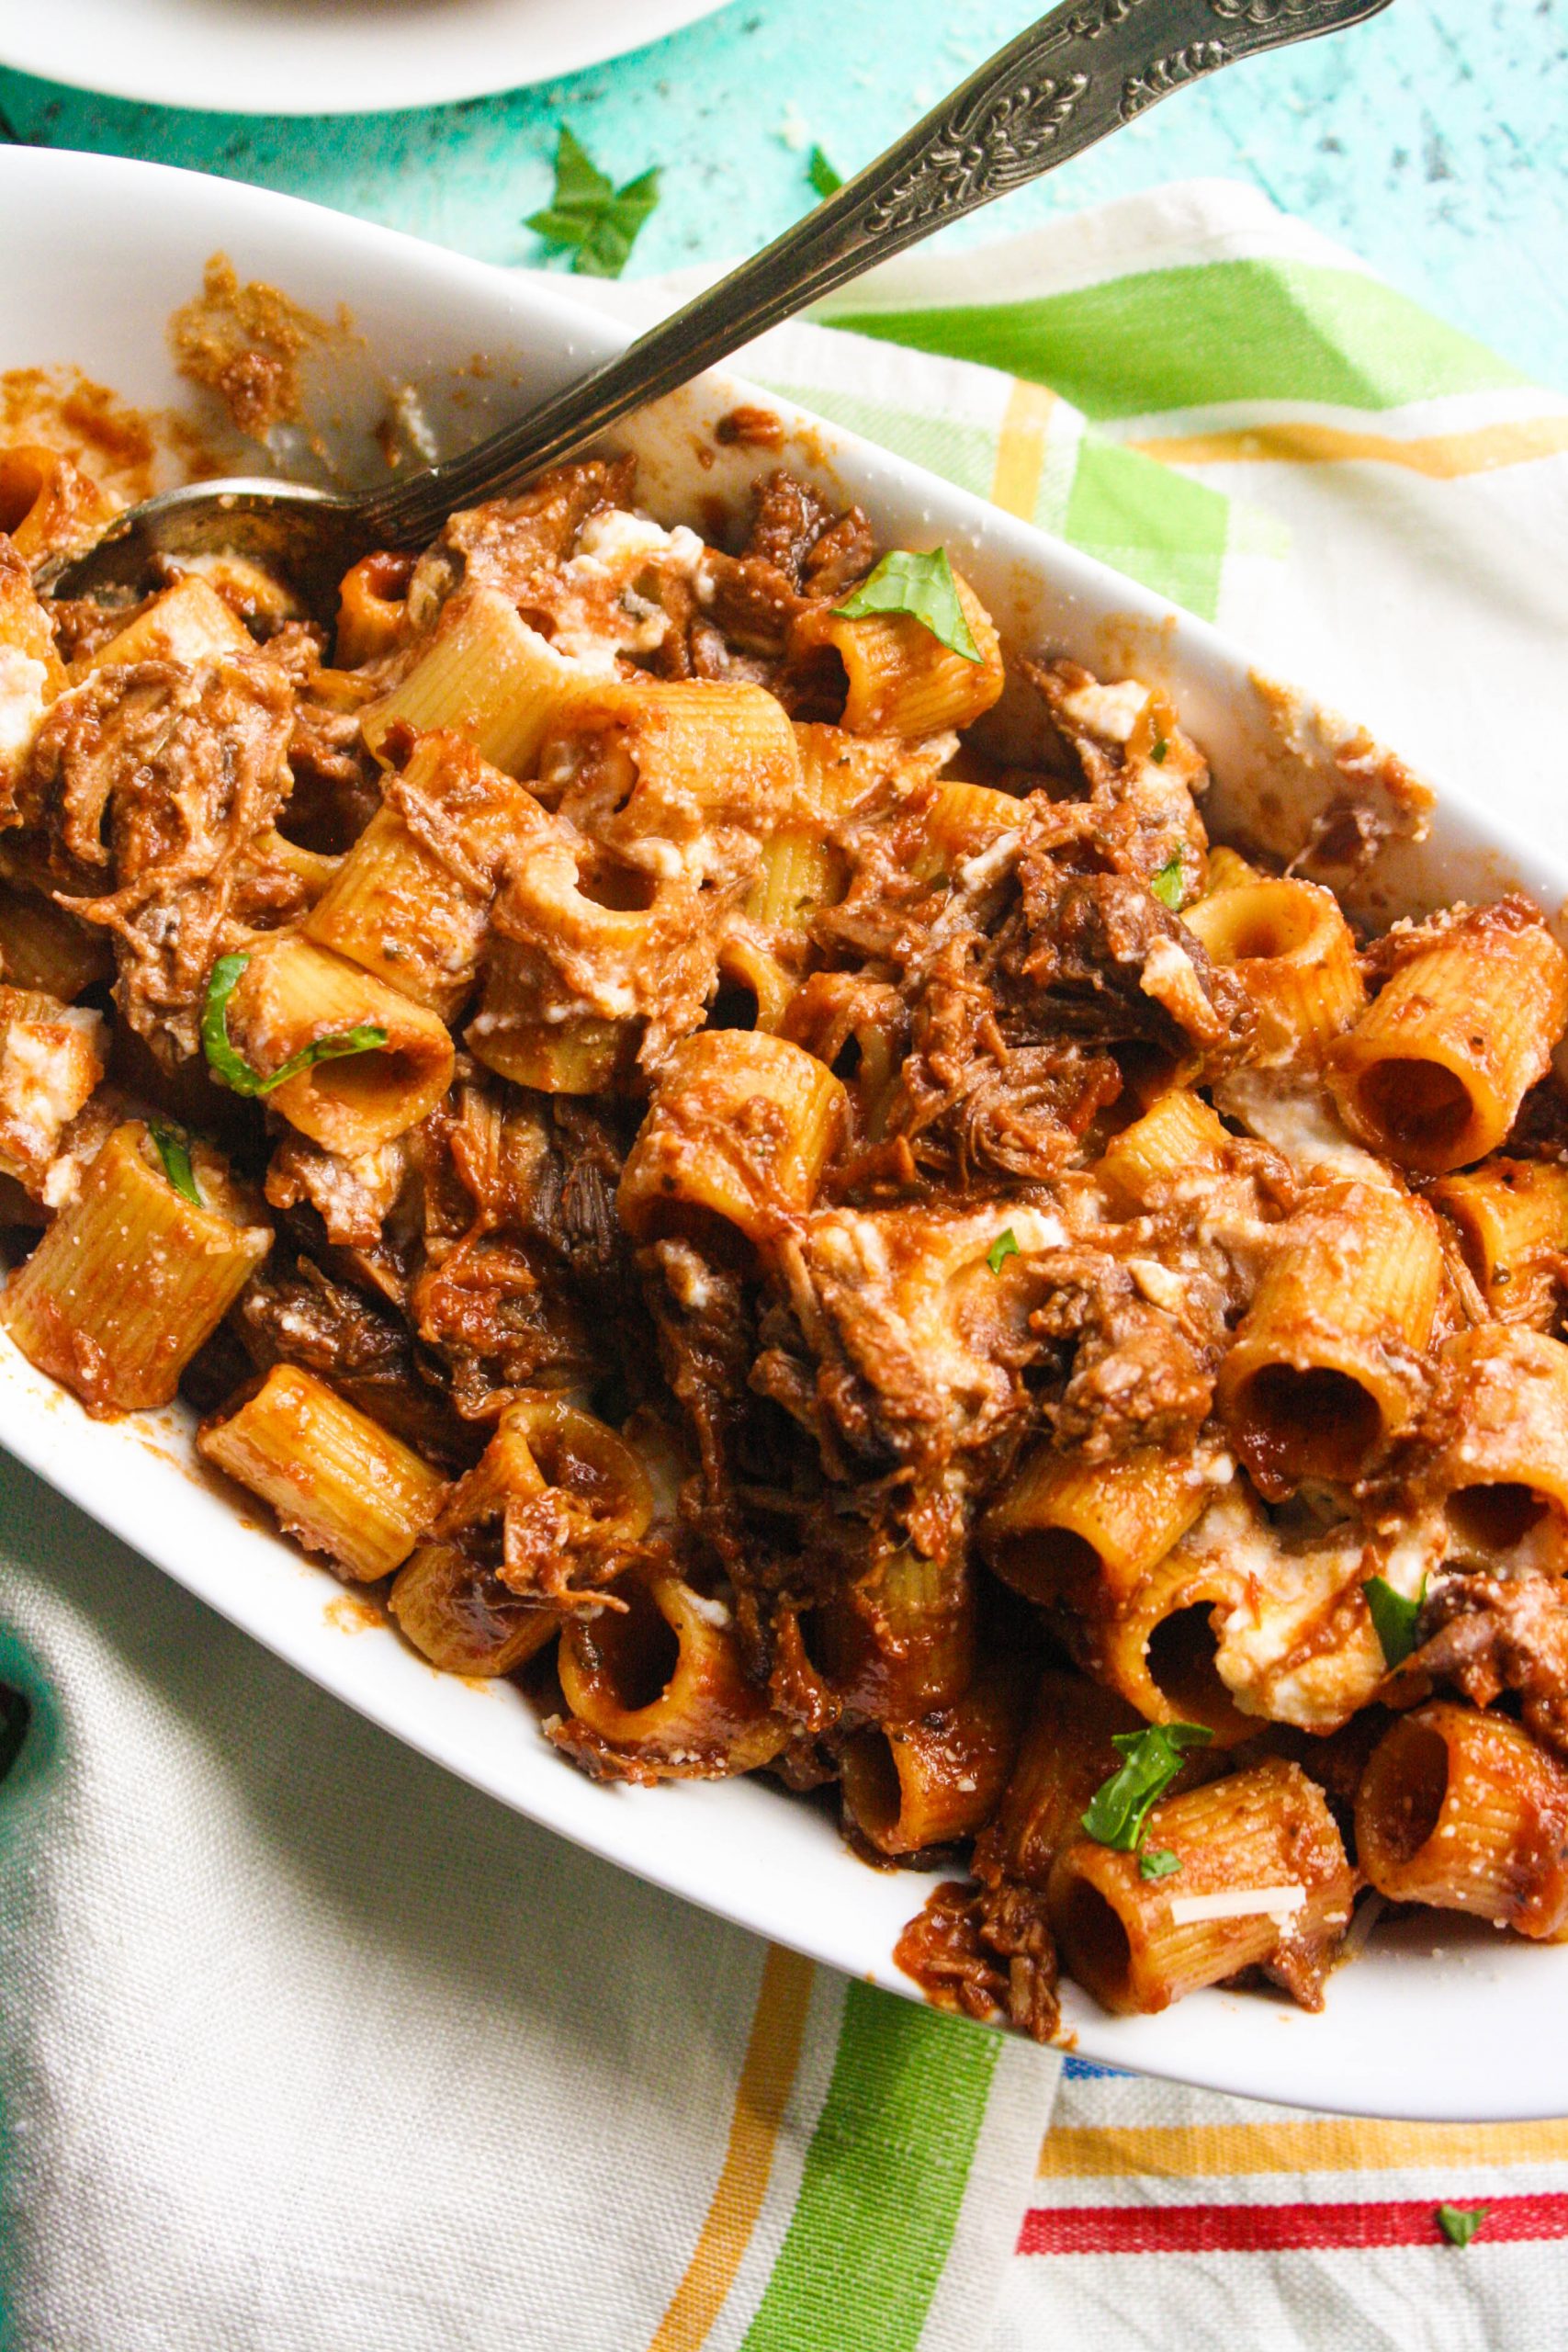 You'll love to dig into this Pasta with short ribs and ricotta dish!